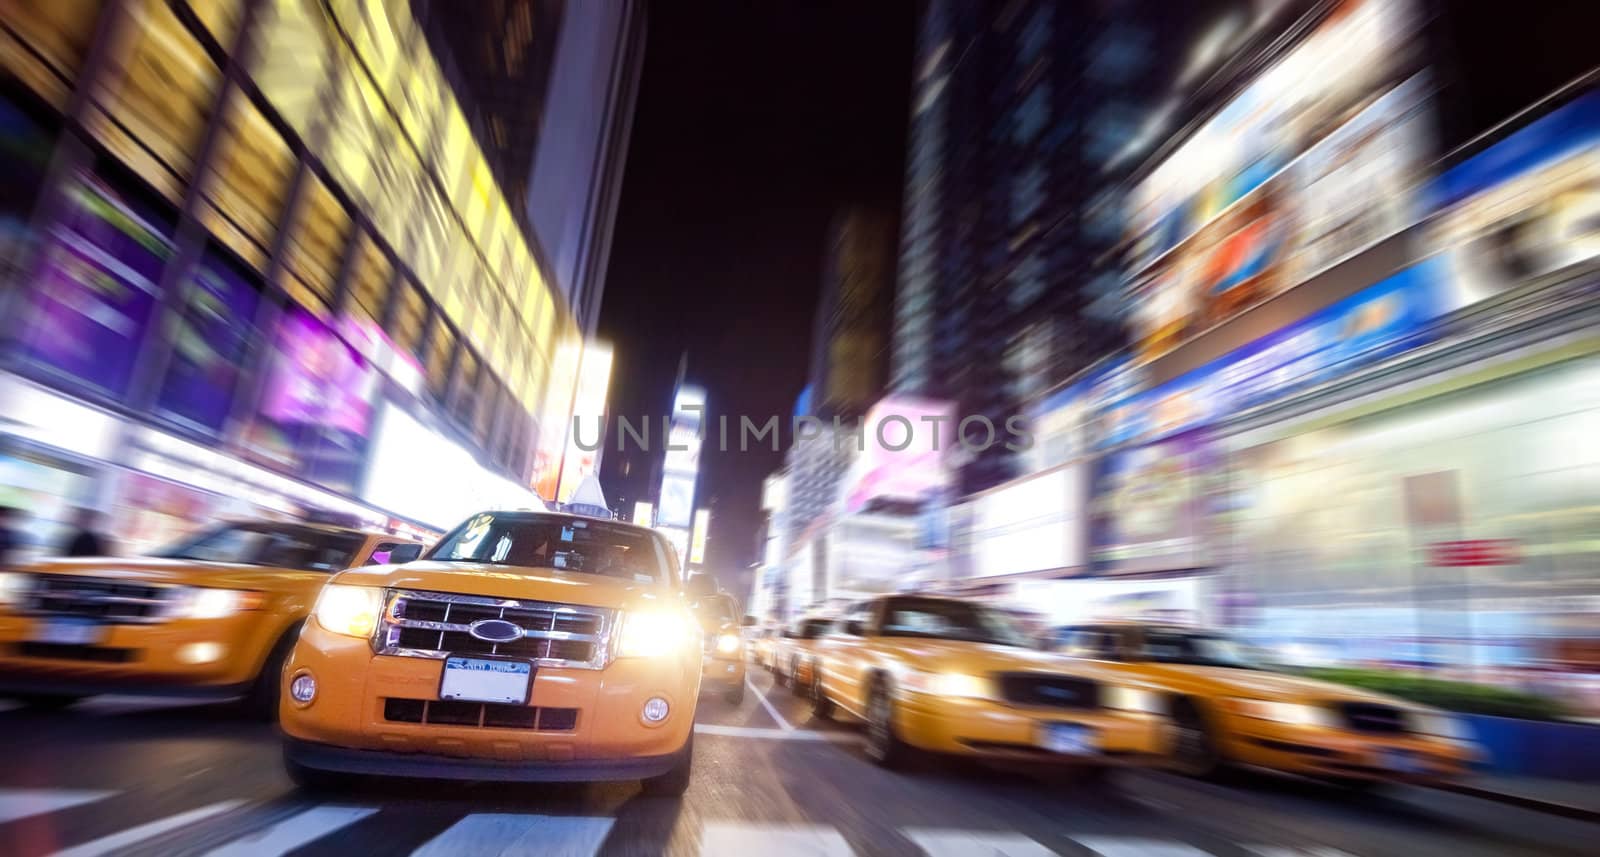 New York Taxi on Time Square in the night by hanusst